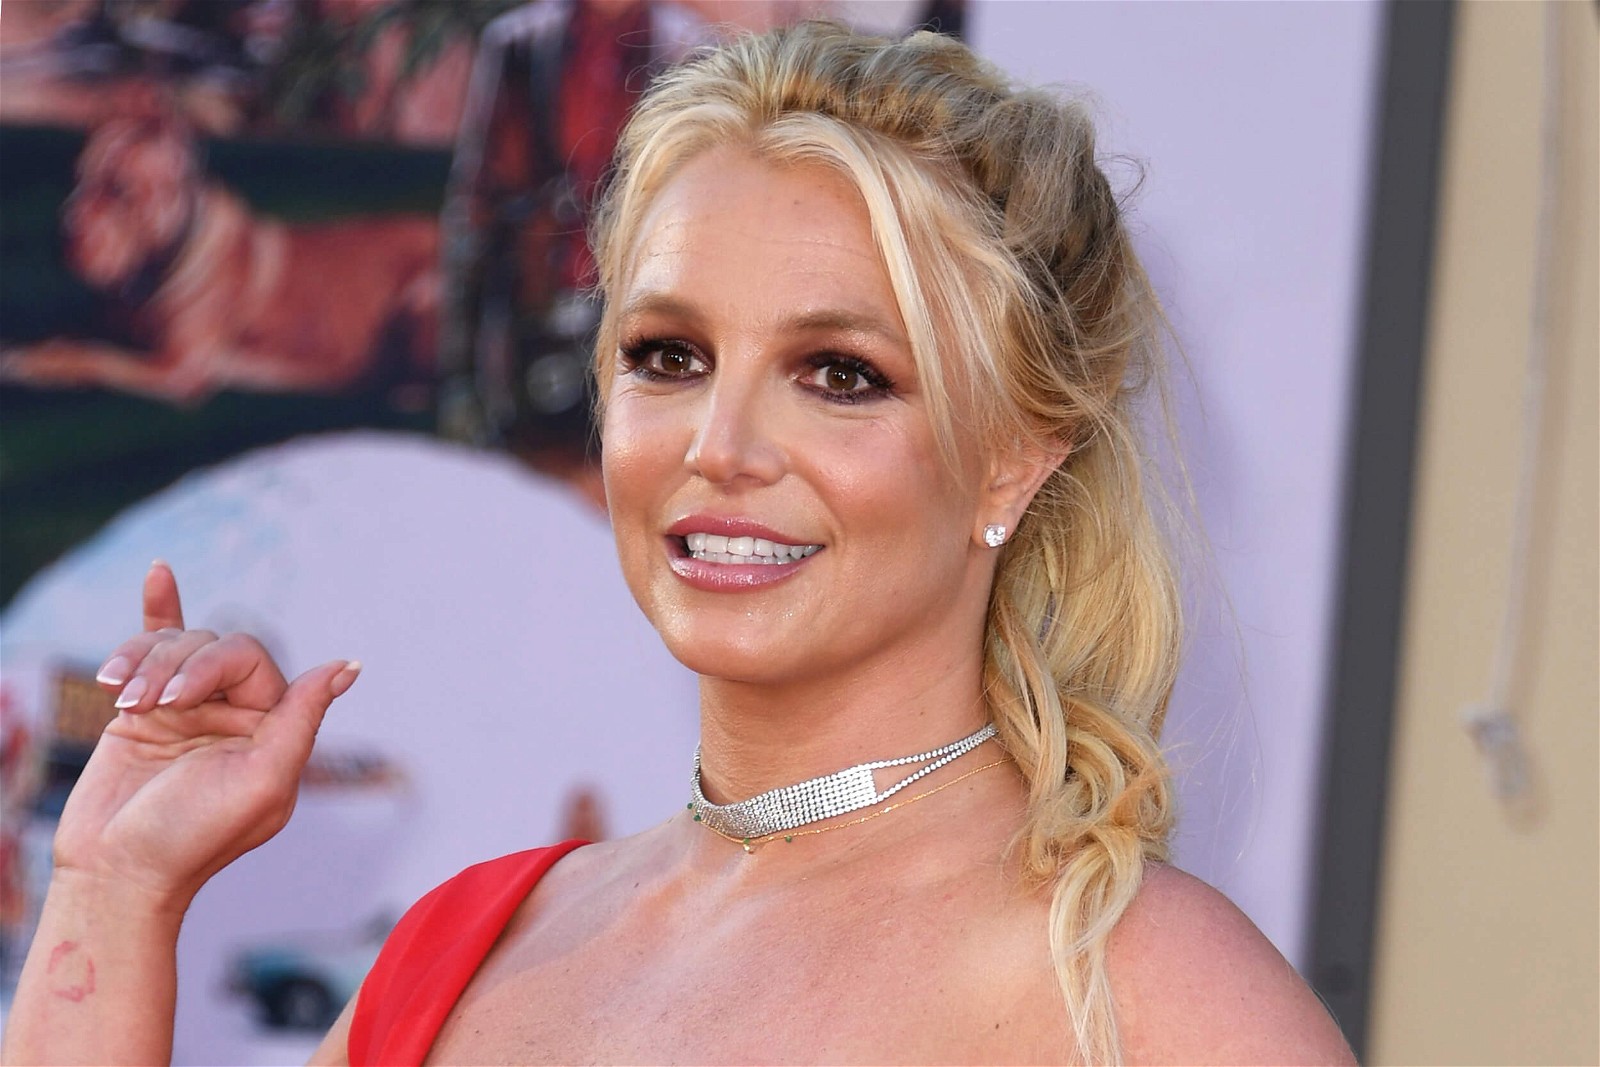 Lynne Spears asked Britney Spears to unblock her 